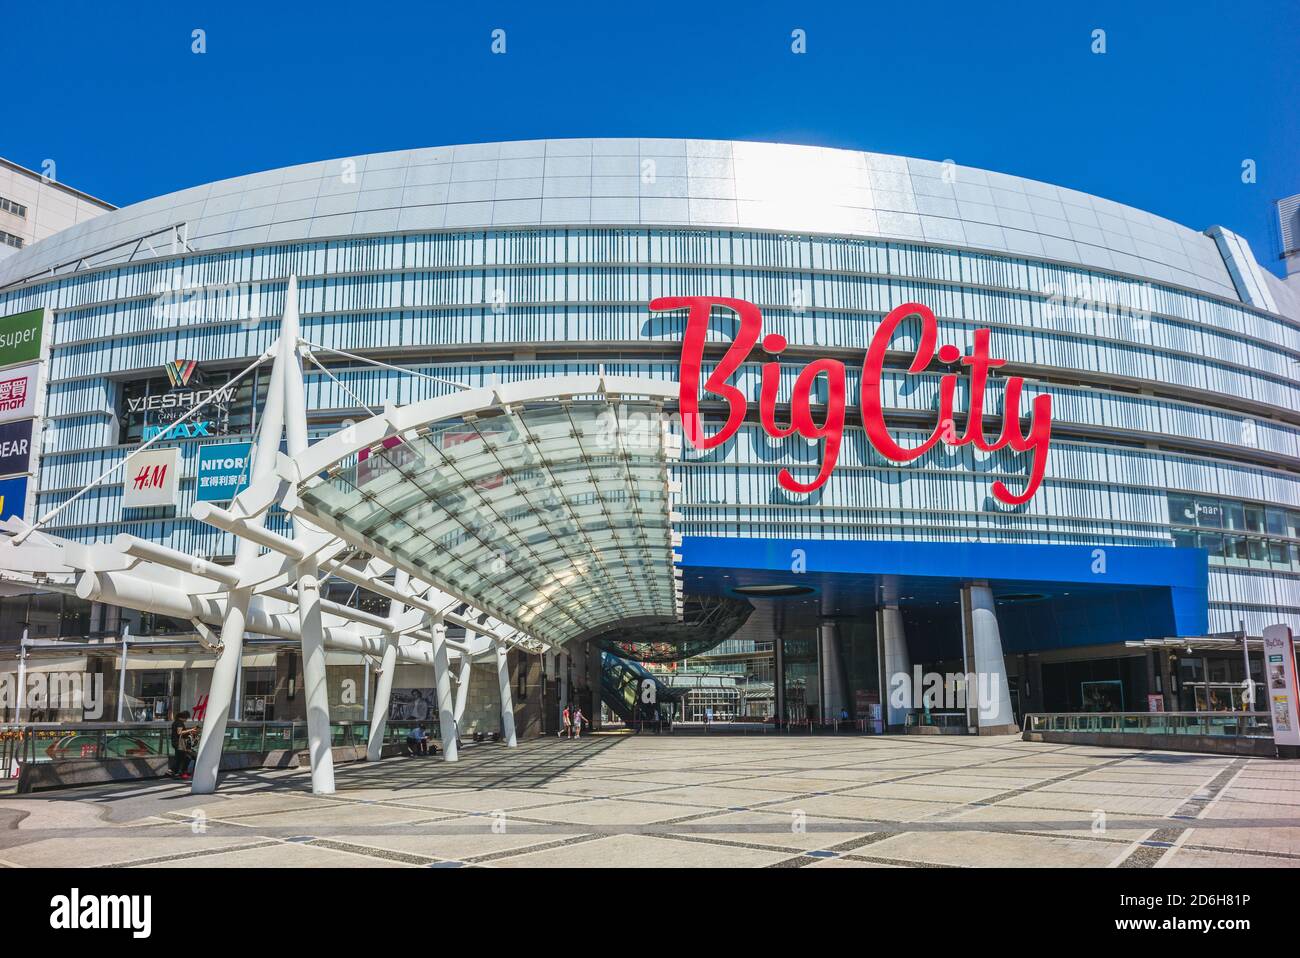 October 15, 2020: Big city shopping mall in hsinchu, taiwan. It is the largest shopping center in Northern Taiwan that offers more than 600 brands, 70 Stock Photo